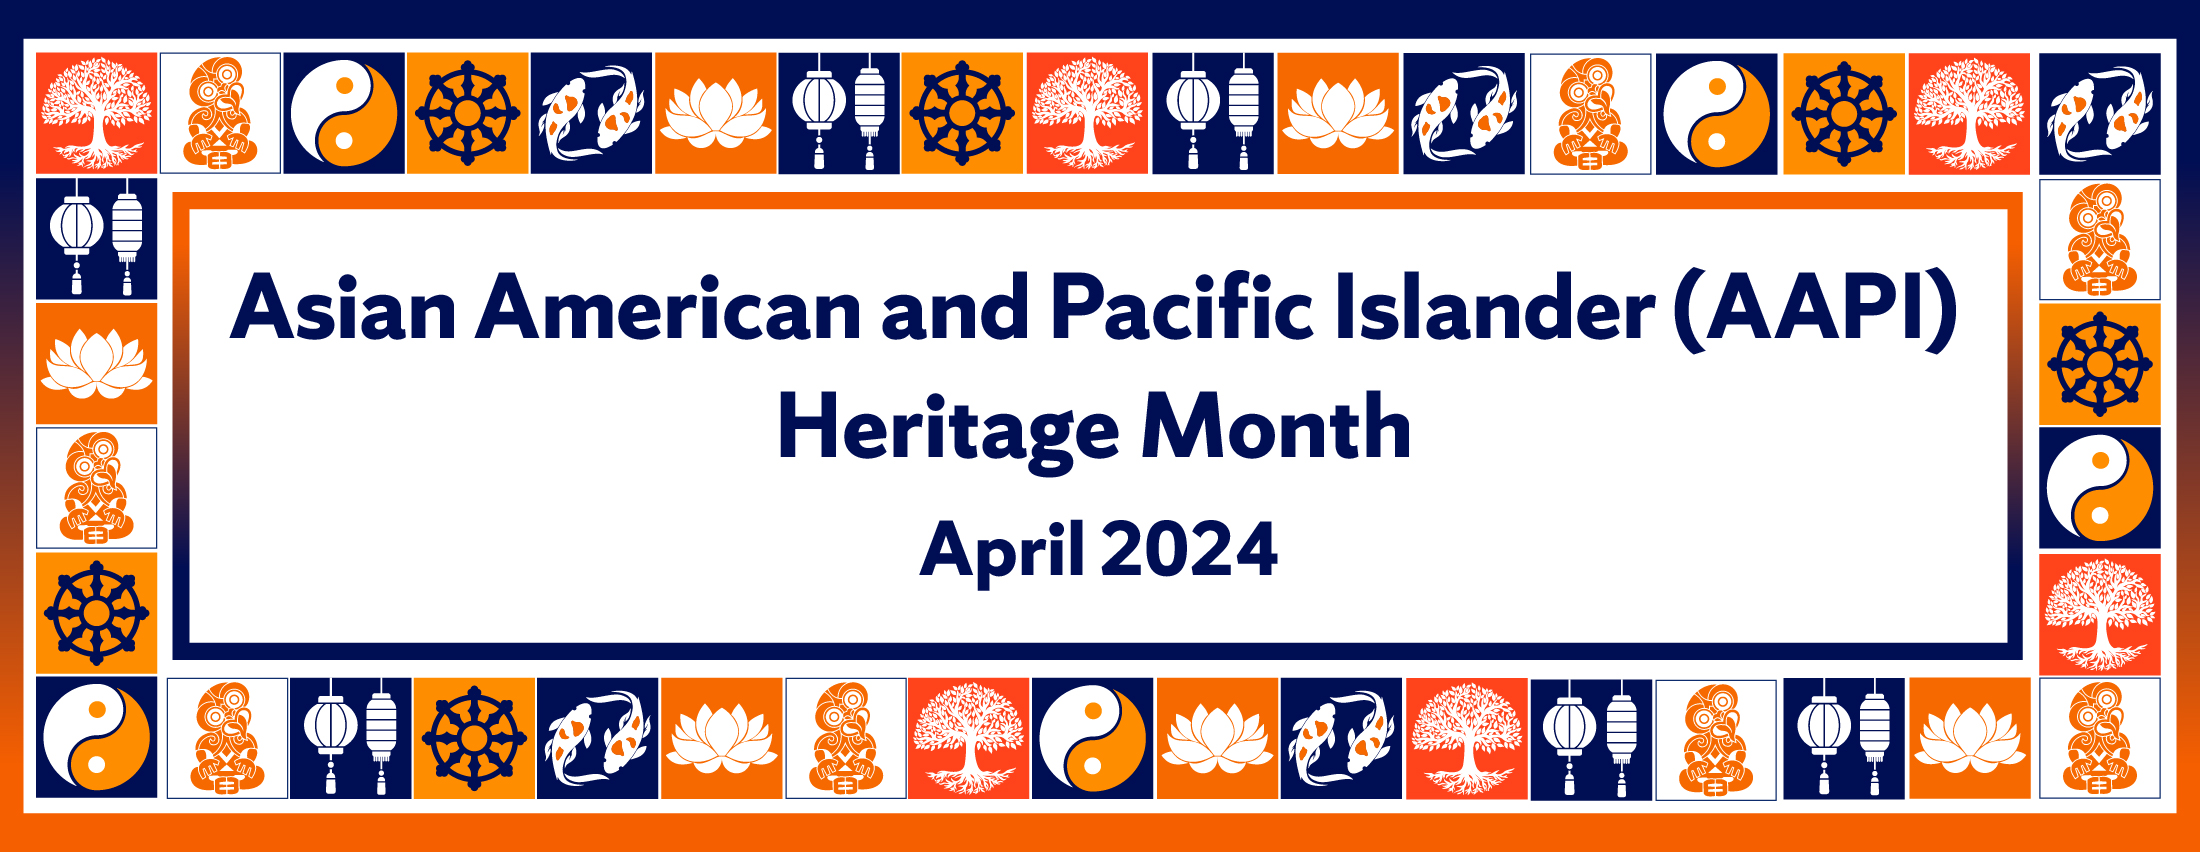 graphic with text Asian American and Pacific Islander (AAPI) Heritage Month April 2024